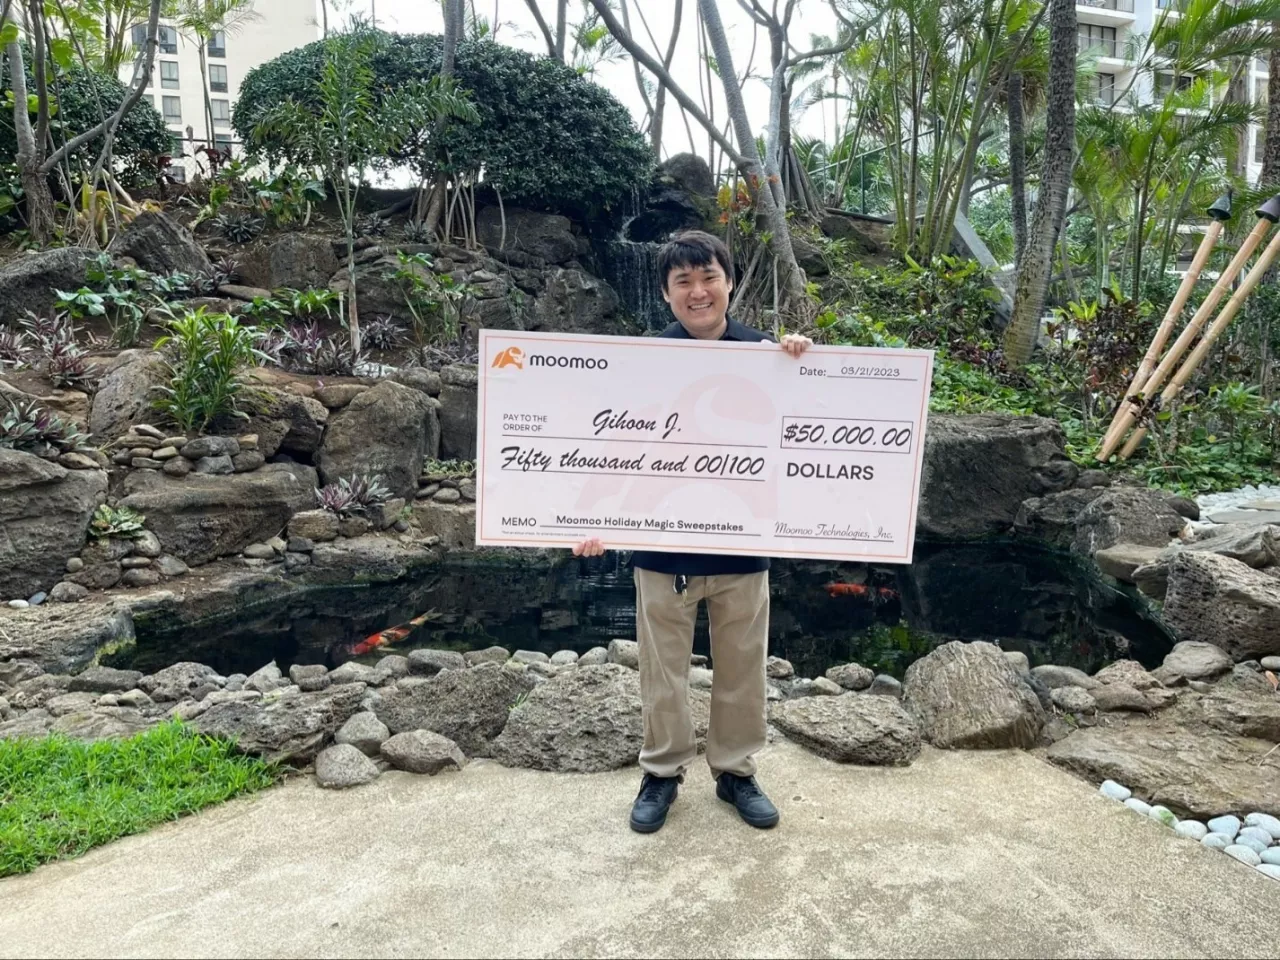 Gihoon J. of Honolulu receives the grand prize of $50,000 from moomoo. img#1